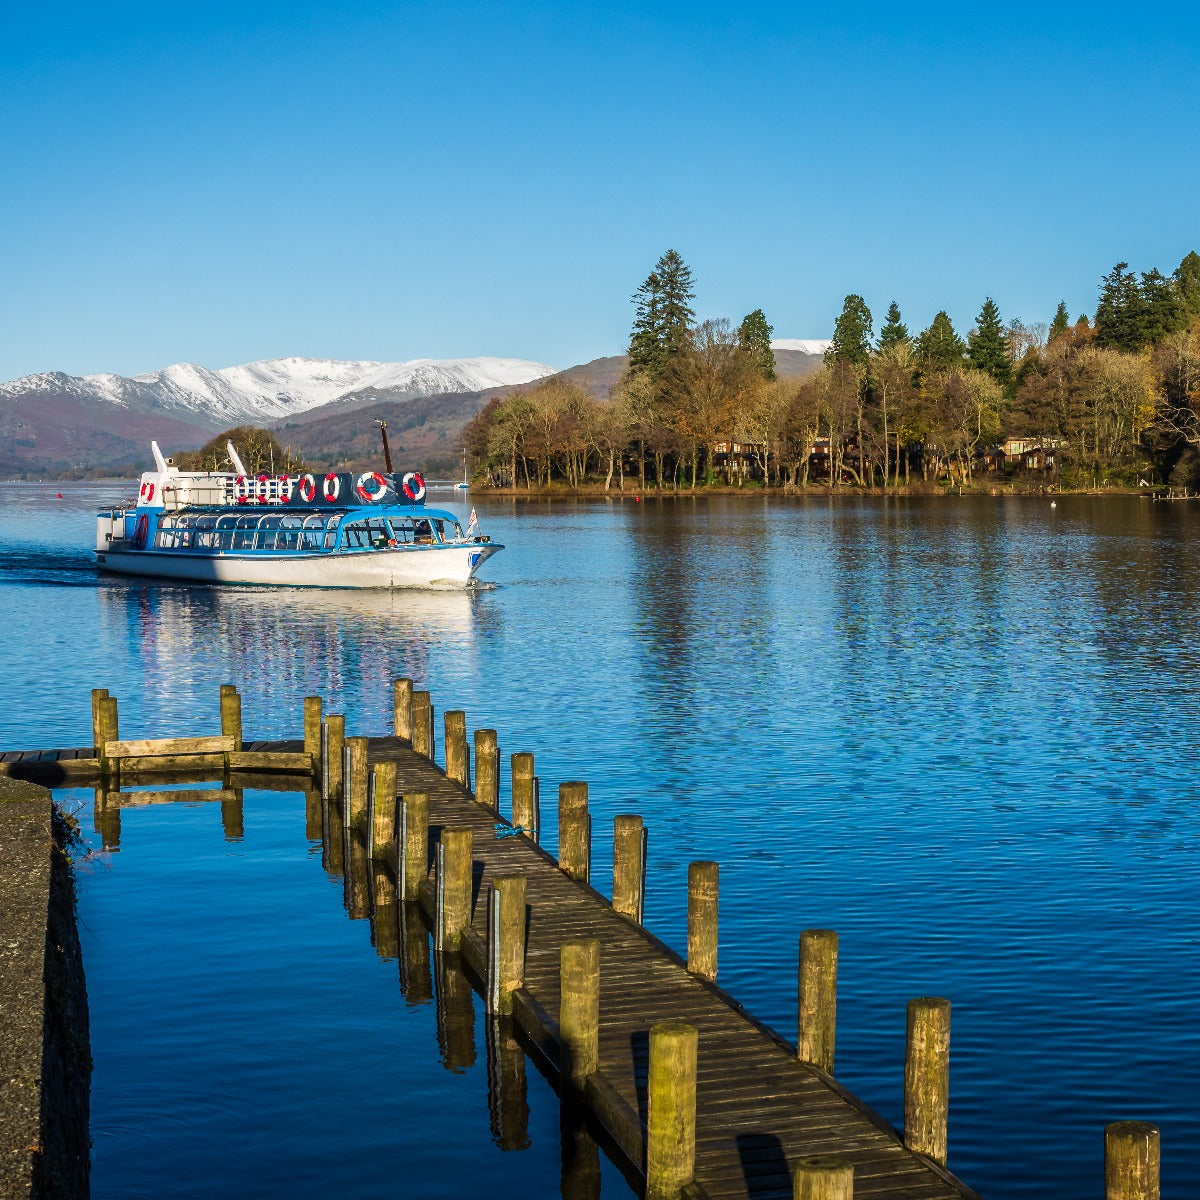 Beside Lake Windermere at Bowness